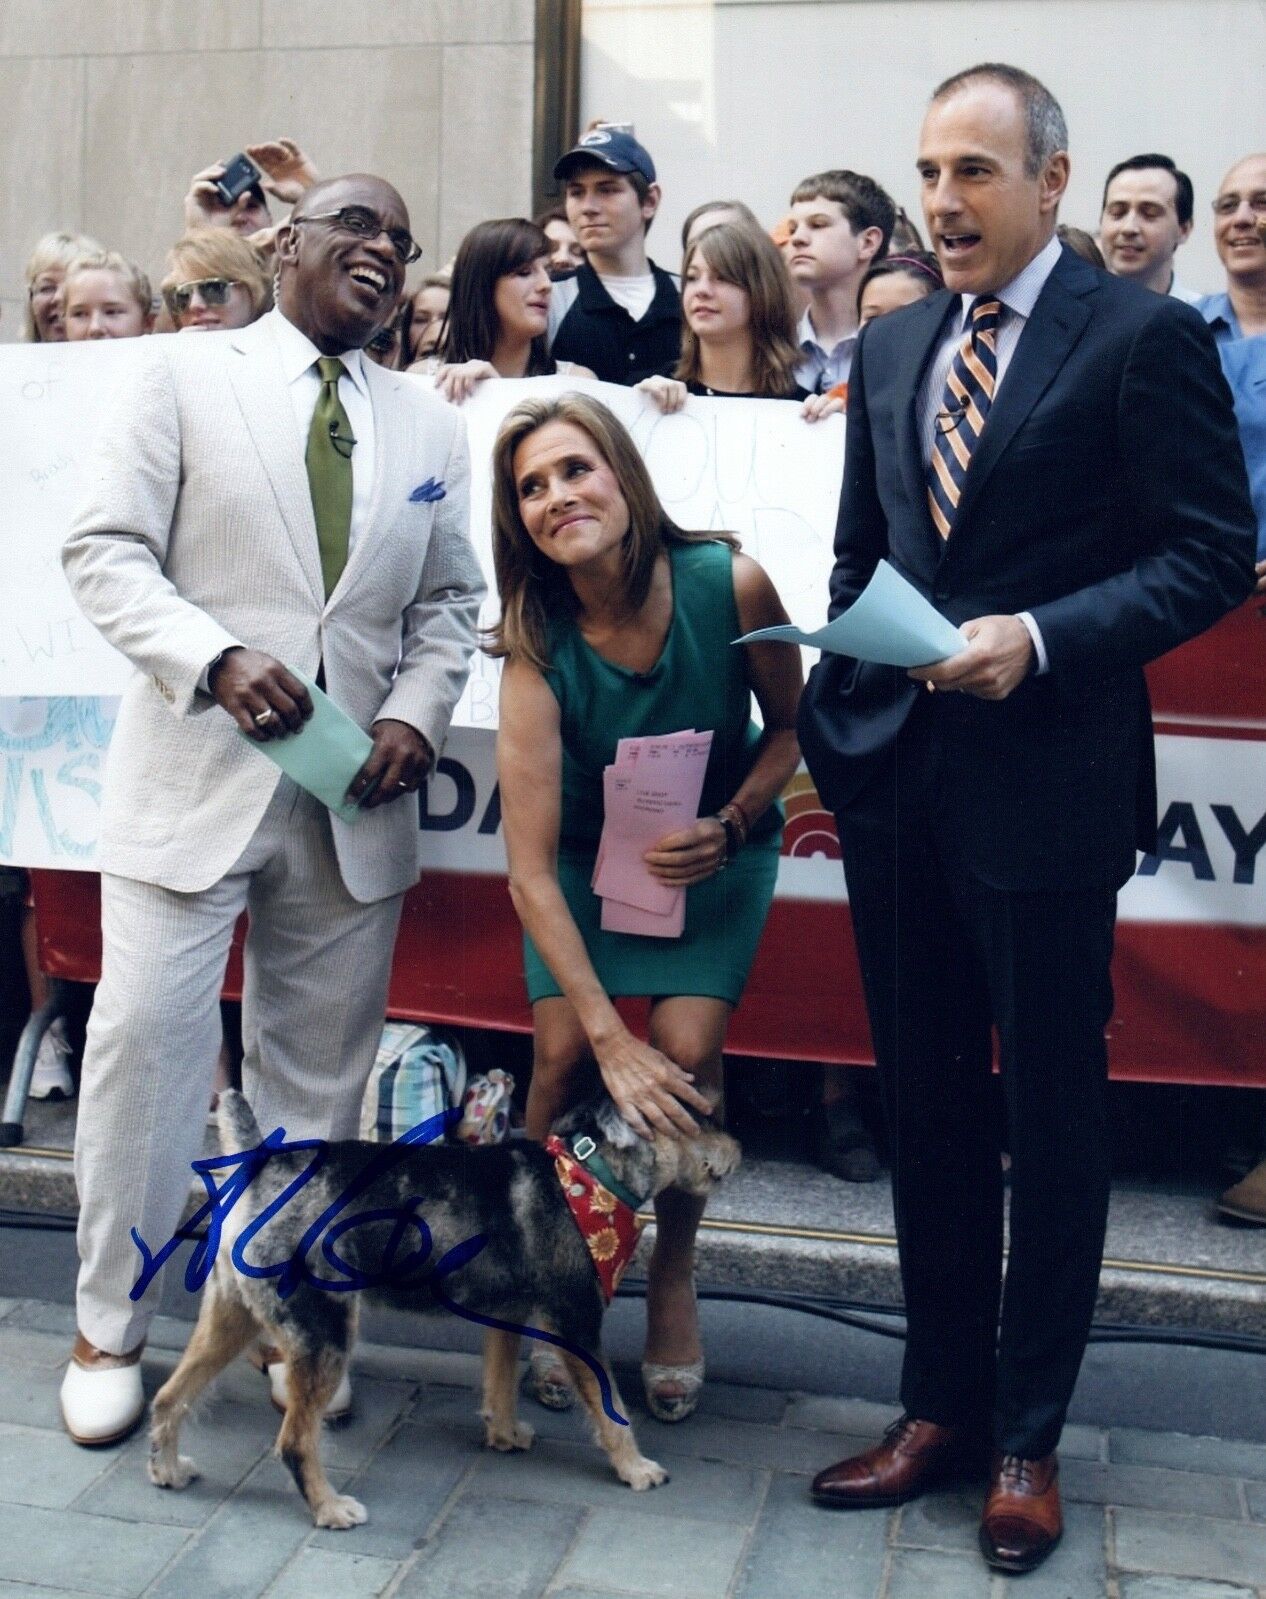 Al Roker Signed Autographed 8x10 Photo Poster painting The Today Show Weatherman COA VD